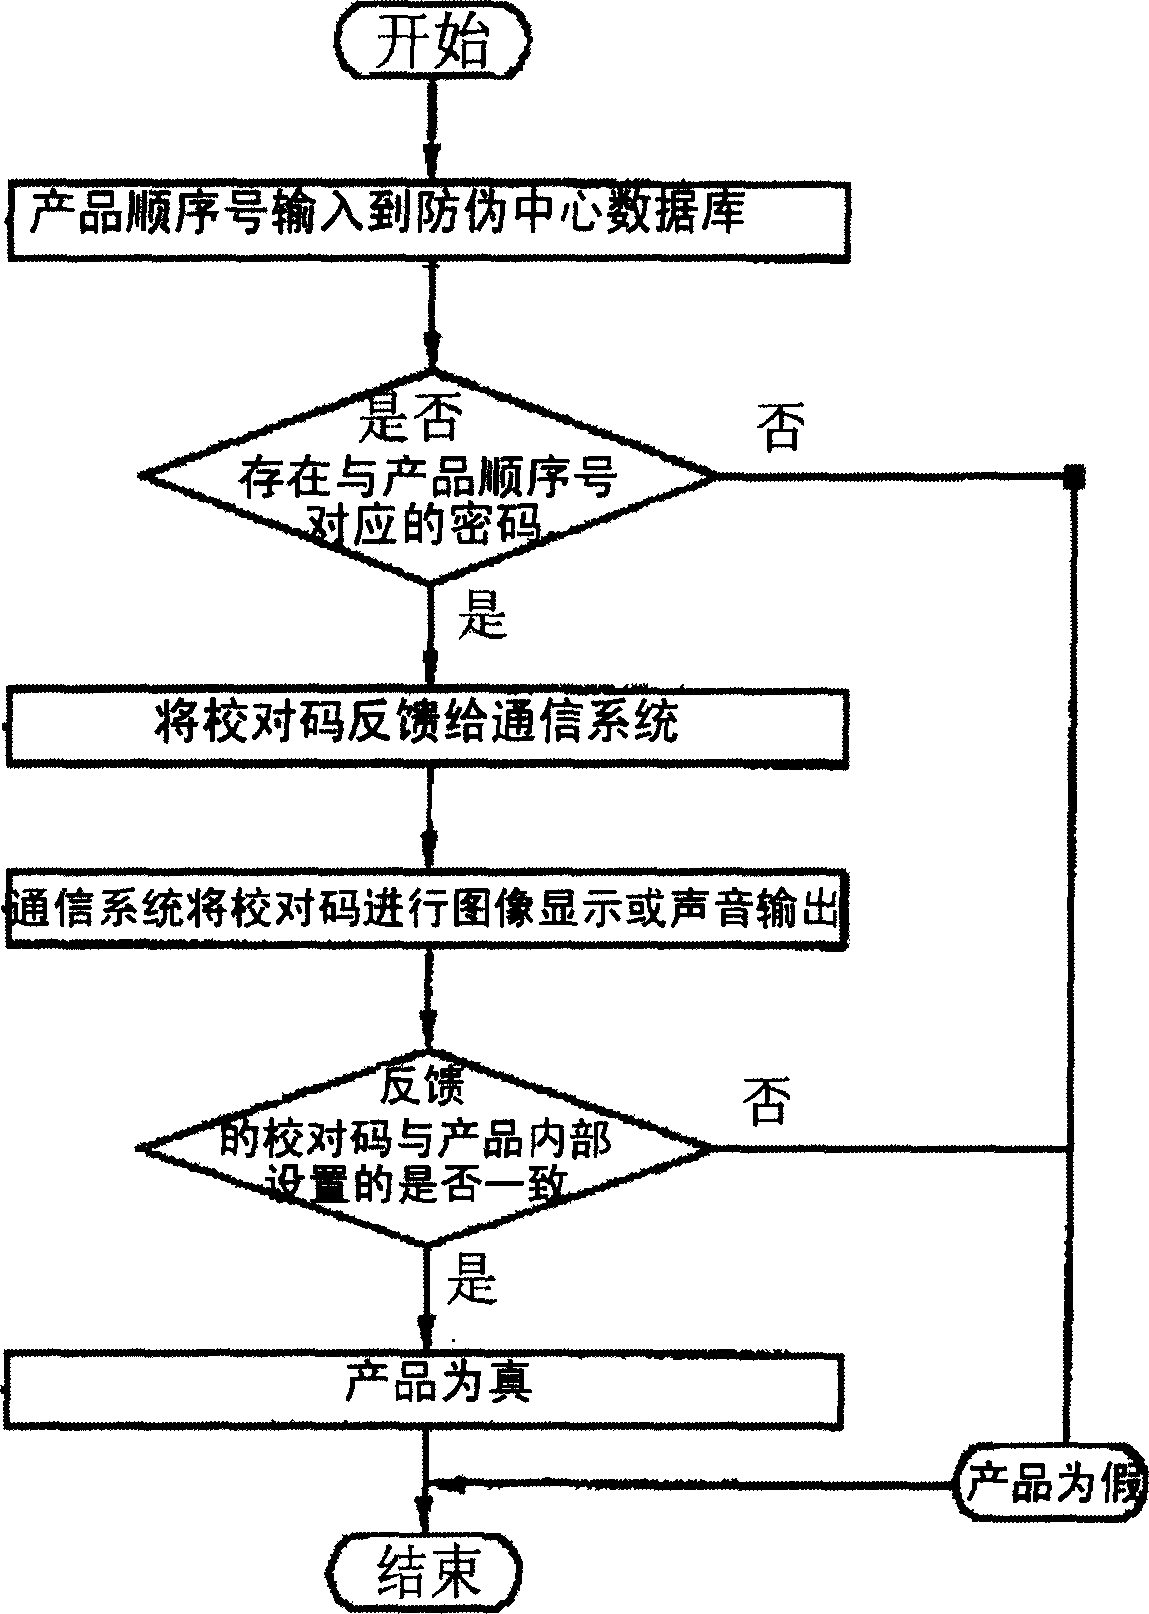 Anti-fogery double-code inquiring system and method